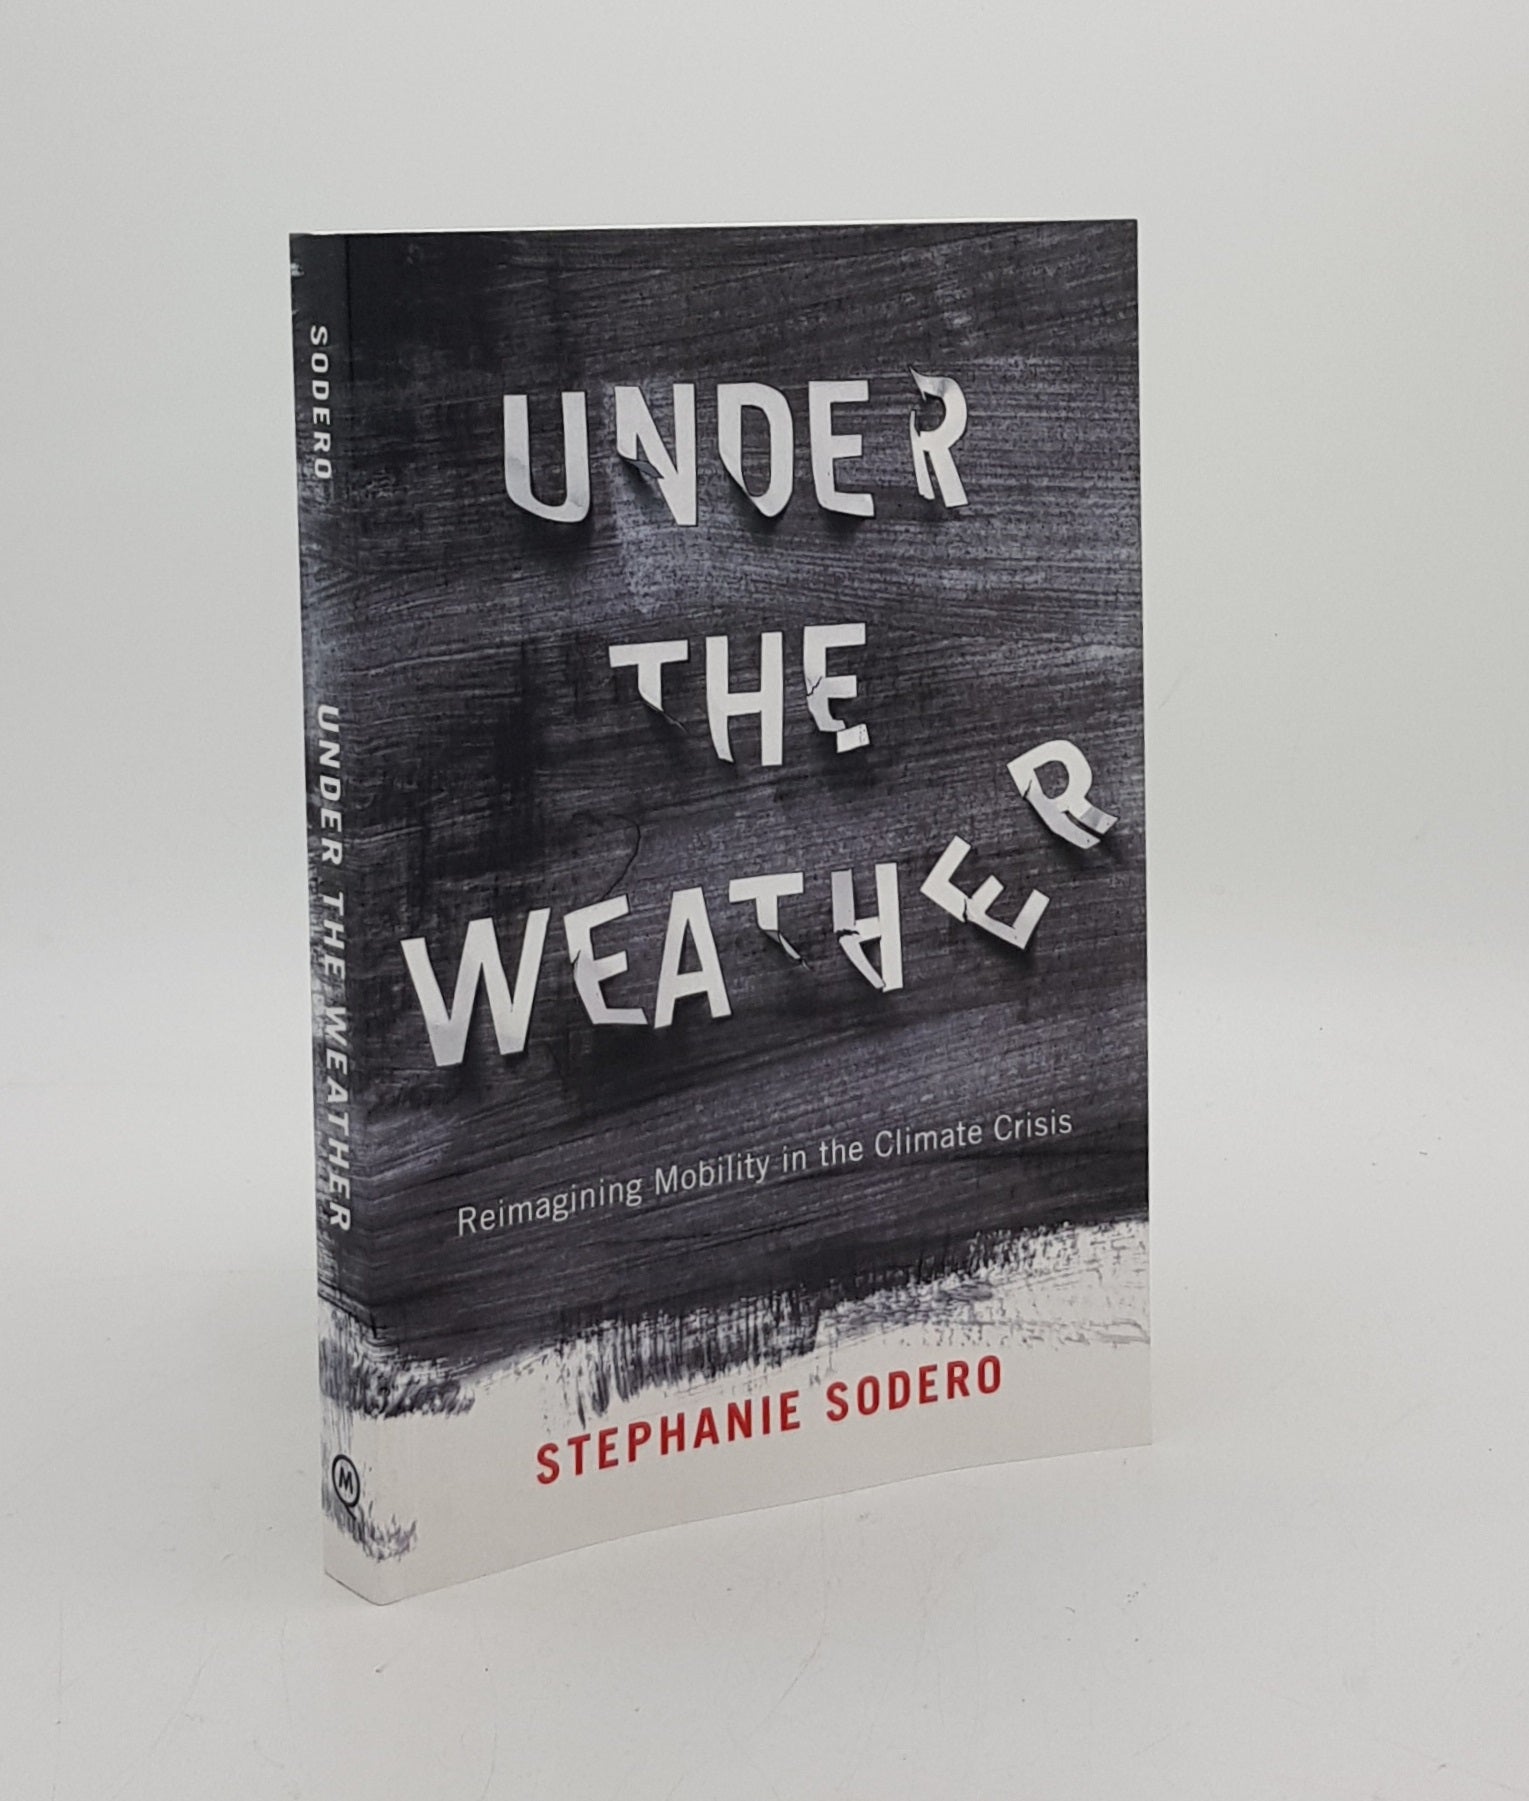 SODERO Stephanie - Under the Weather Reimagining Mobility in the Climate Crisis